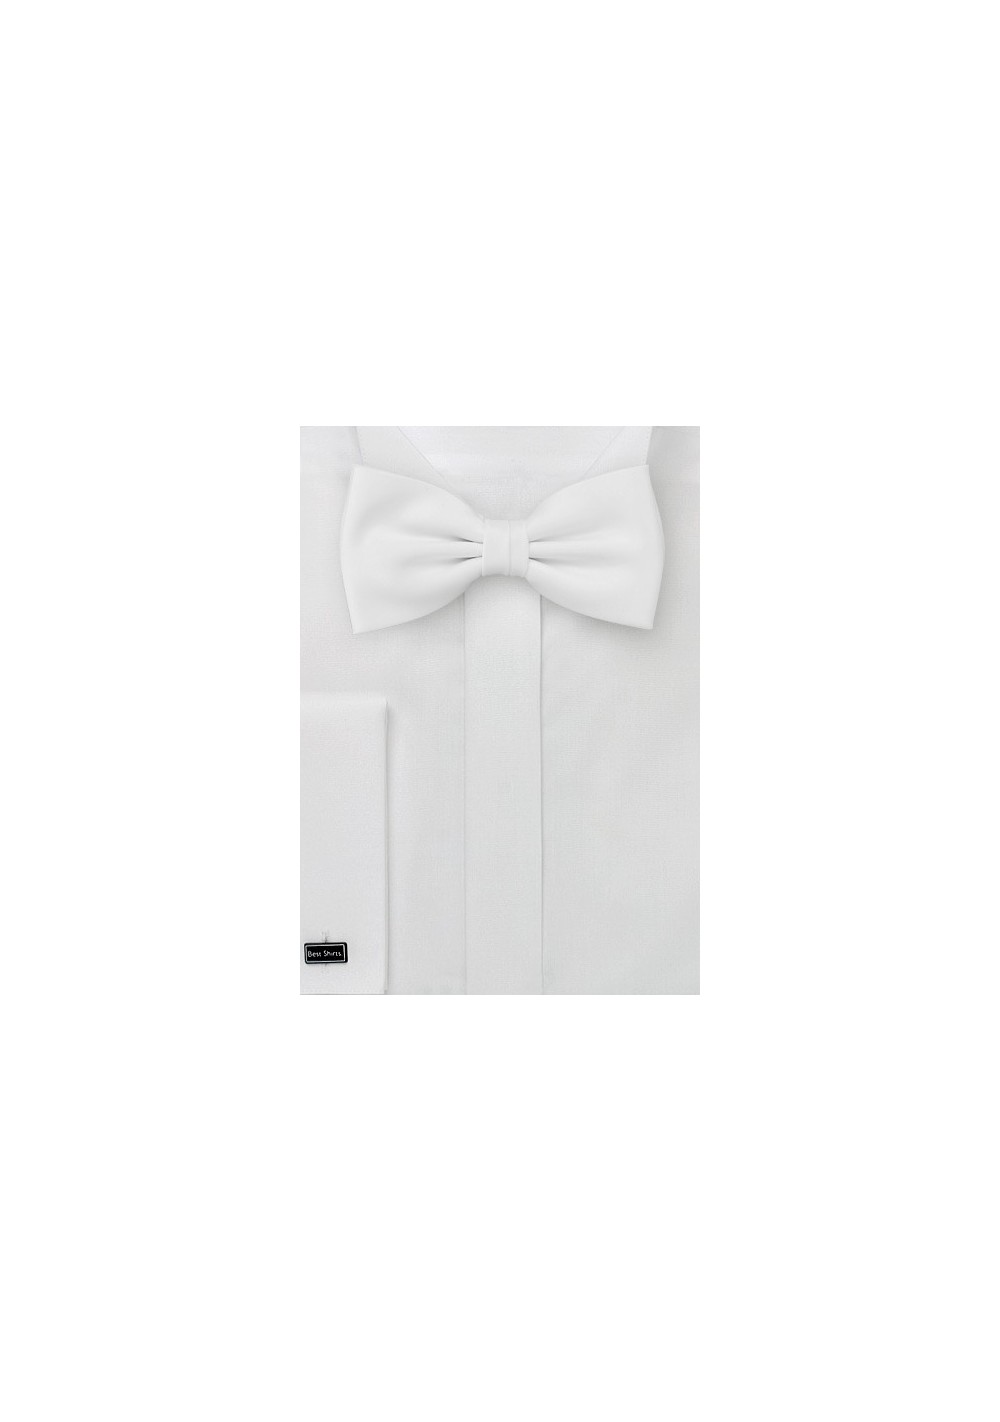 White bow tie  - Formal bow tie in bright white color